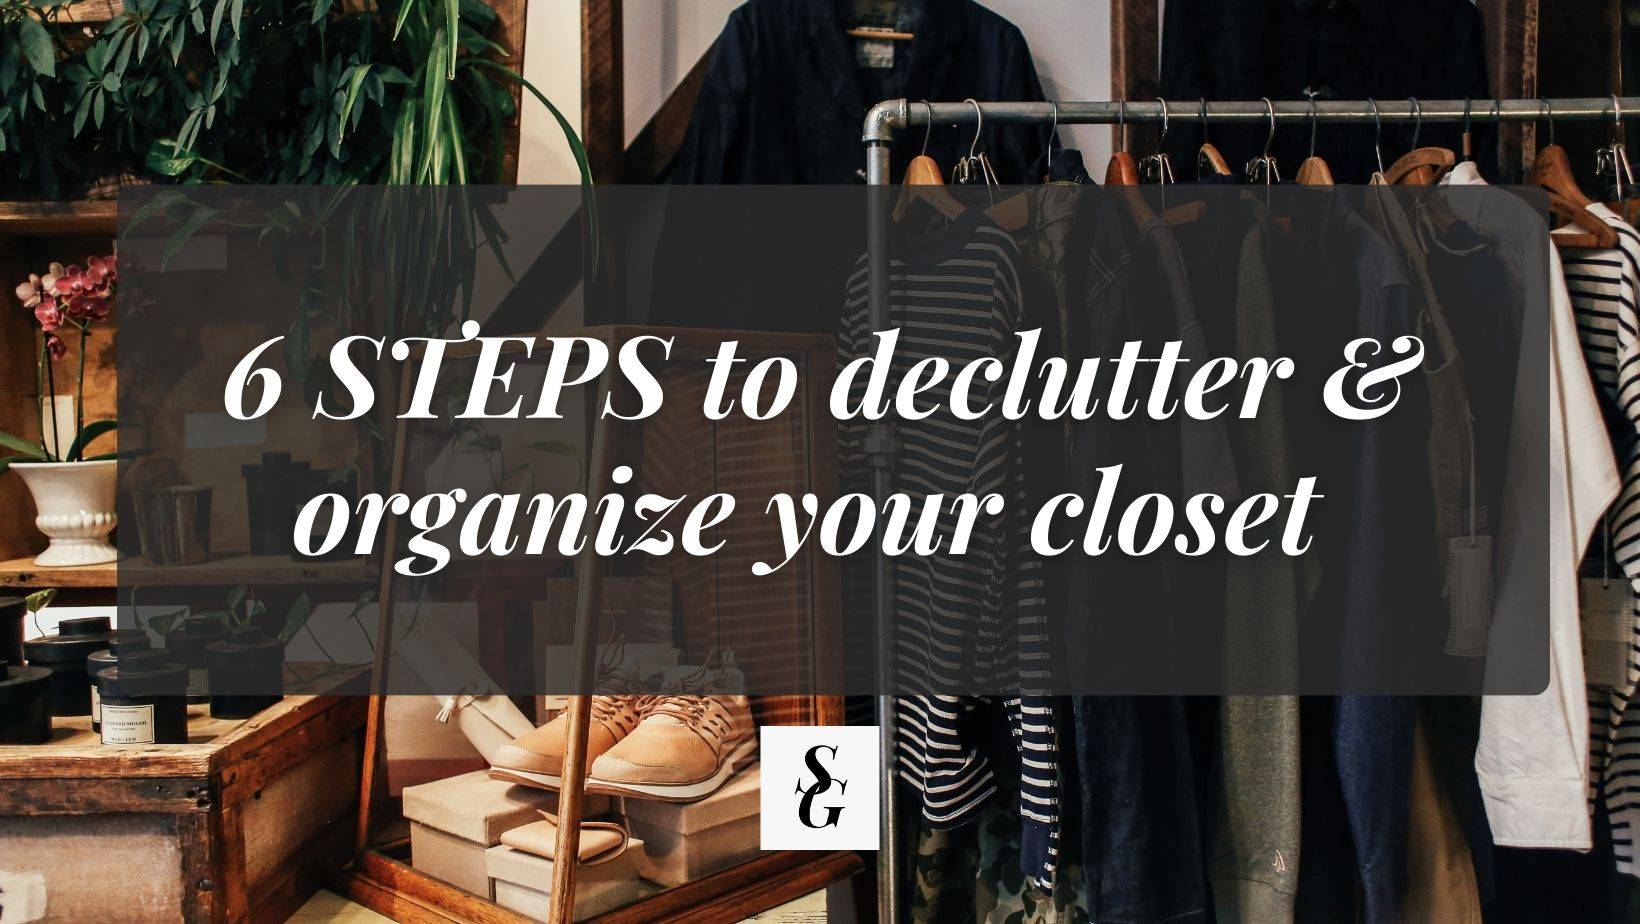 How to Declutter & Organize Your Closet in 6 Steps